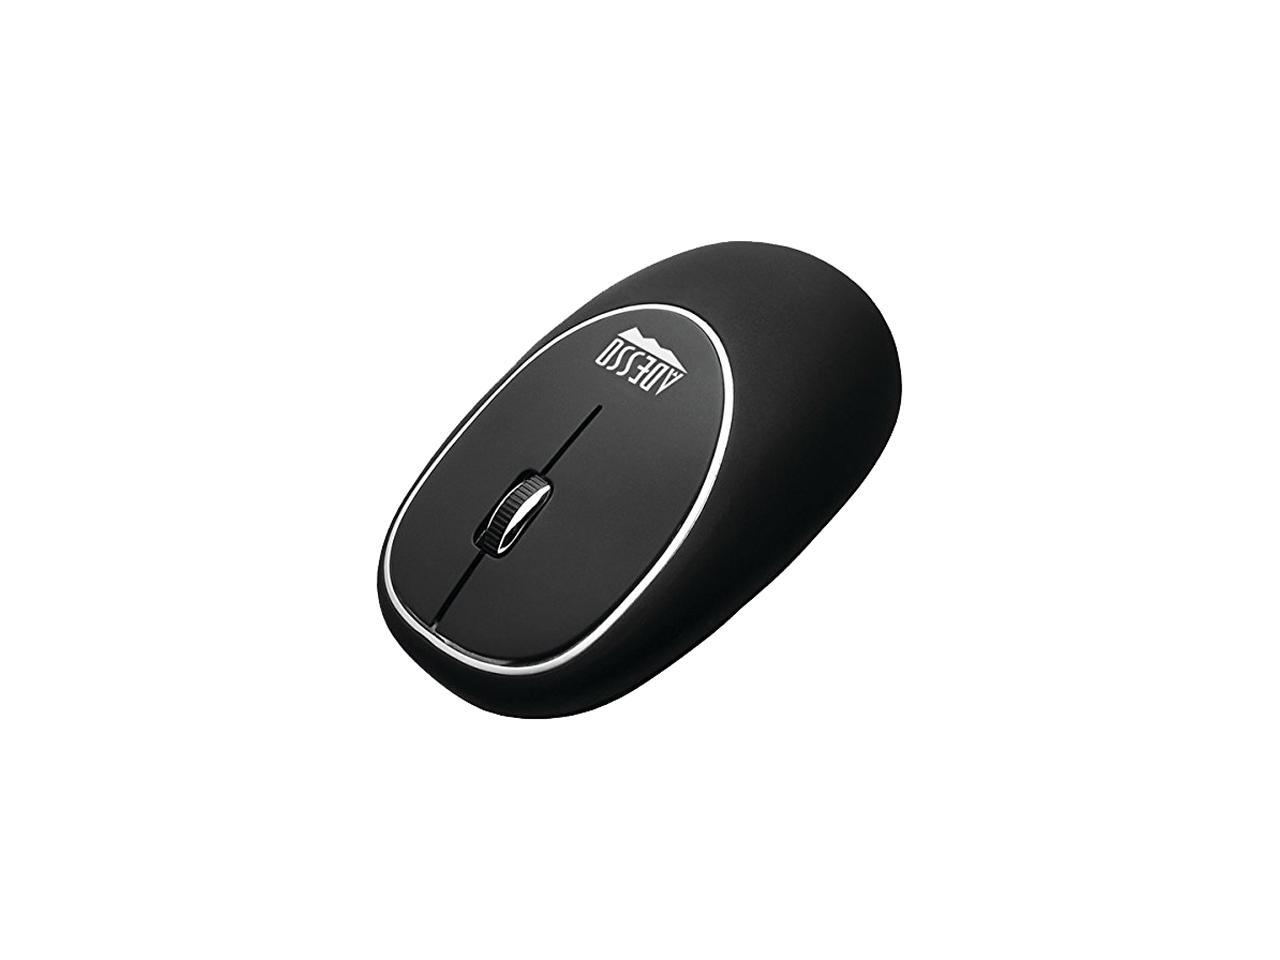 Adesso iMouseE60B 2.4GHz RF Wireless Anti-Stress Gel mouse with Ergonomic Gel surface (Black)